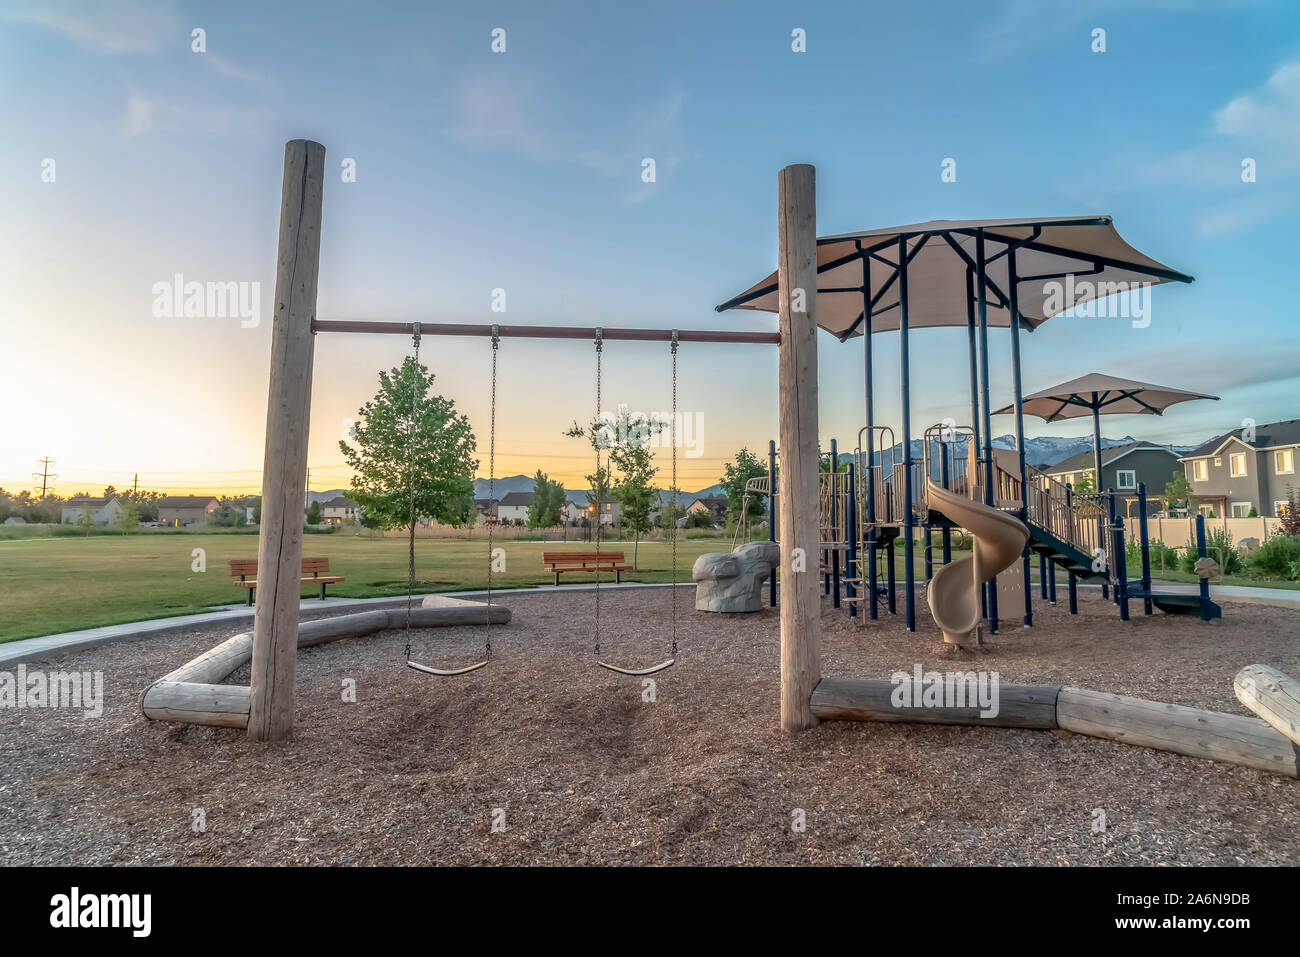 Childrens playground at a park with swings slides and umbrellas viewed at sunset Stock Photo